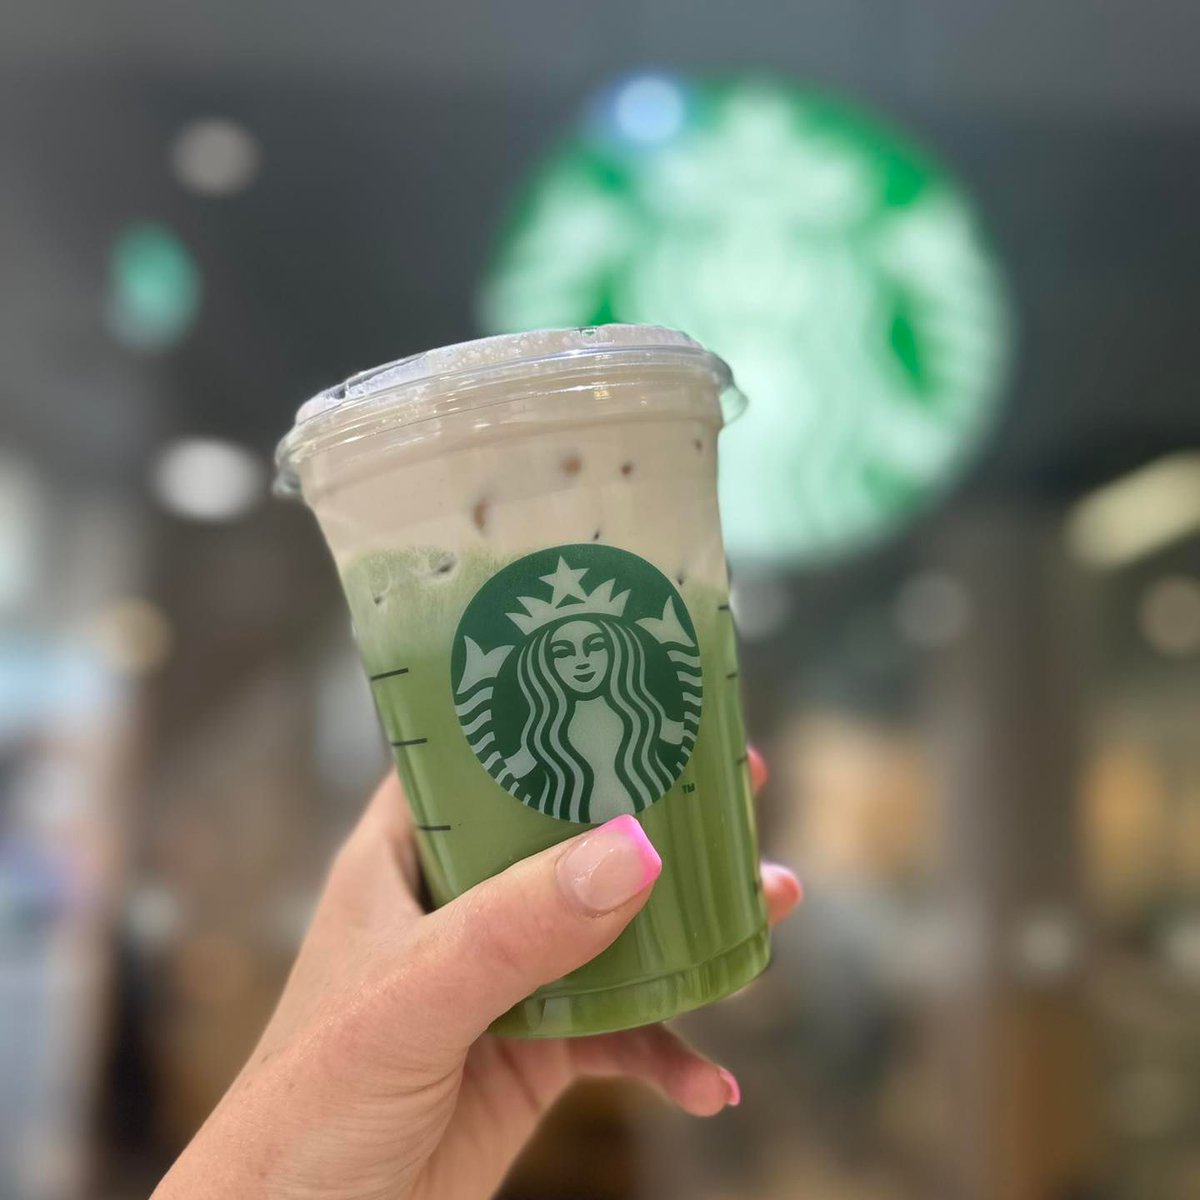 Refreshing vibes with every sip of @starbucks iced strawberry matcha latte! 🍓💚 #SpringSips #Starbucks #doncaster #frenchgate